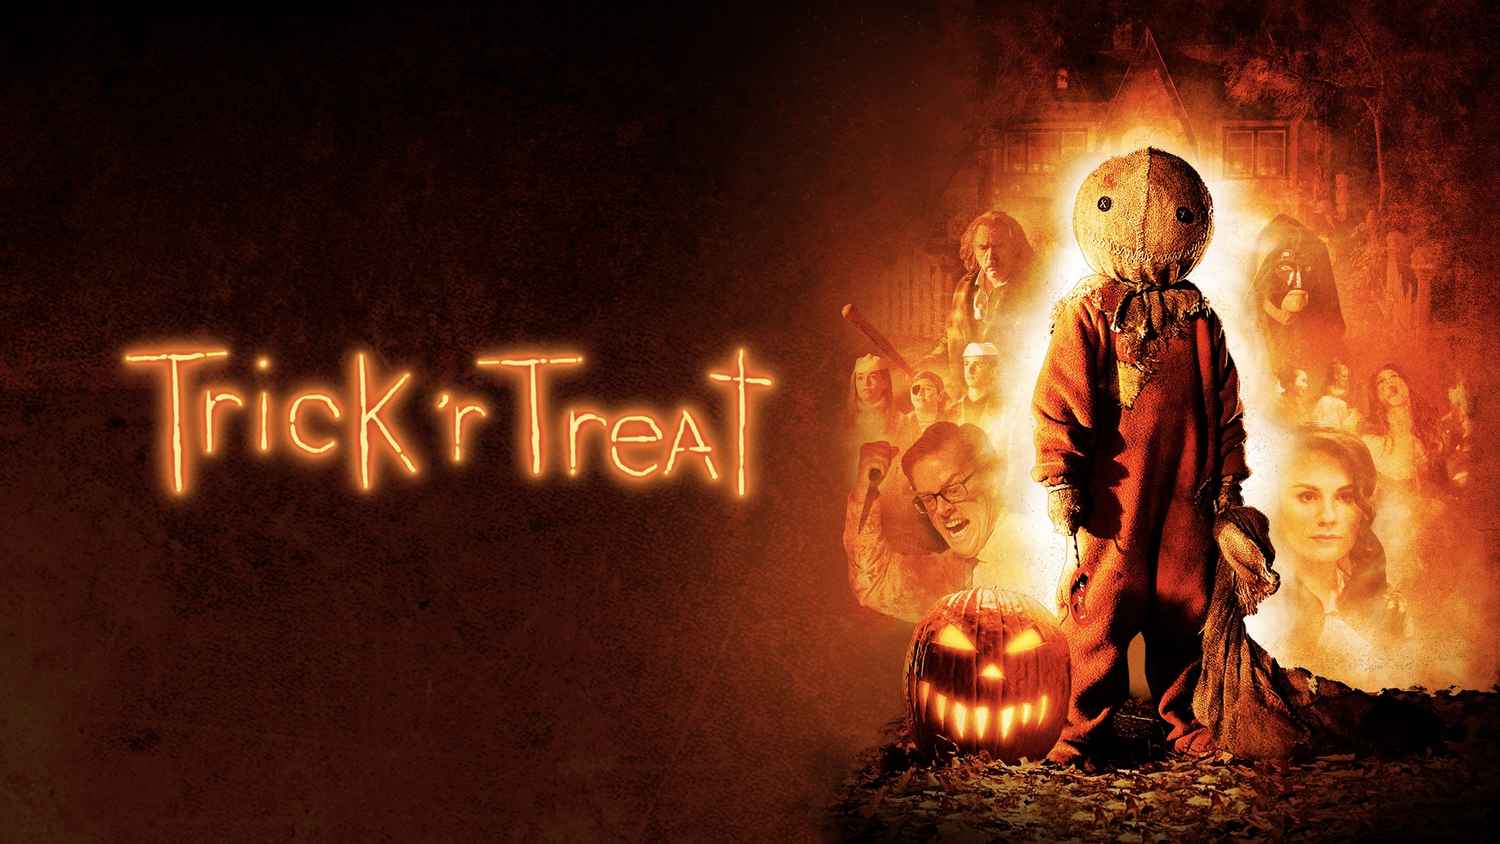 Watch Trick 'r Treat Full Movie Online, Release Date, Trailer, Cast and Songs | Comedy Film